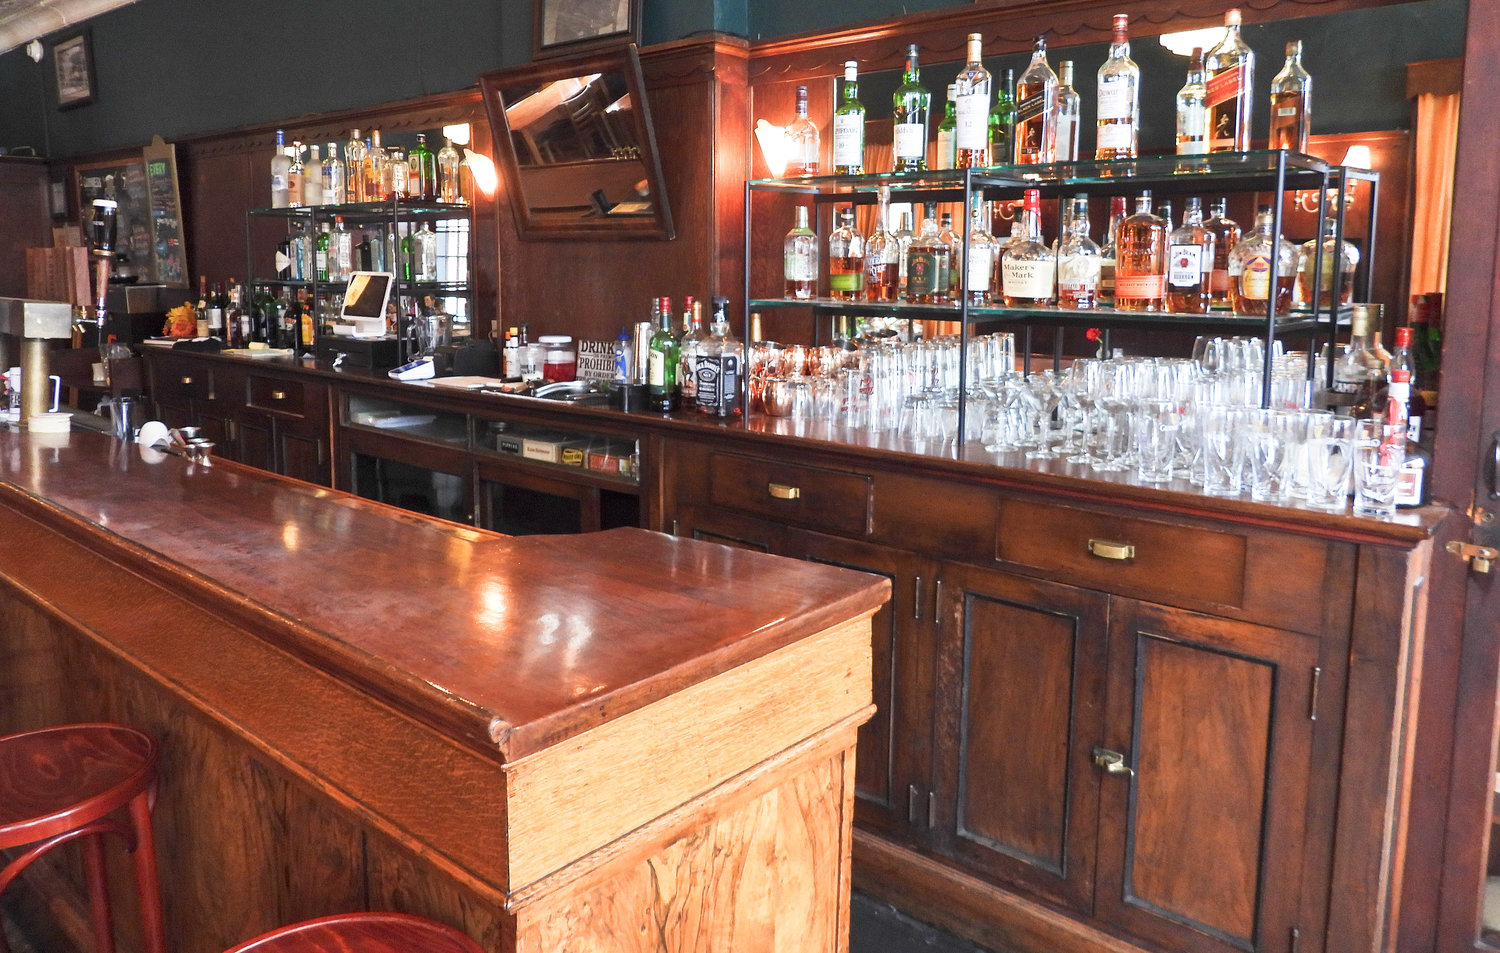 ORIGINAL BAR — Though it sat and languished for years after its doors closed in the 70s, Gerner's 1933 Tavern features the original bar that people sat at for years, even when it wasn't strictly legal.